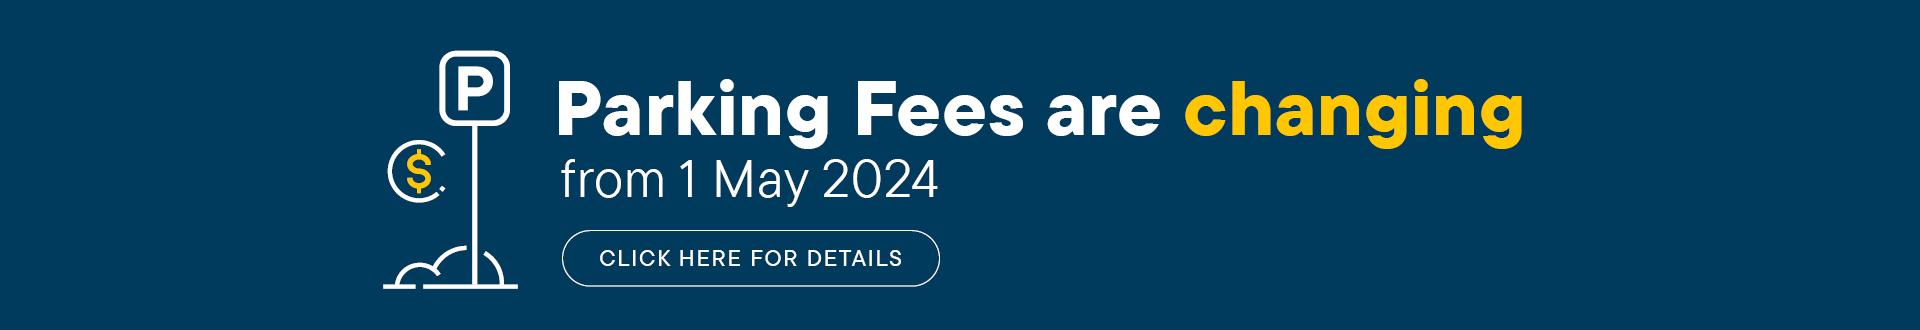 Parking Fee Changes from 1 May 2024